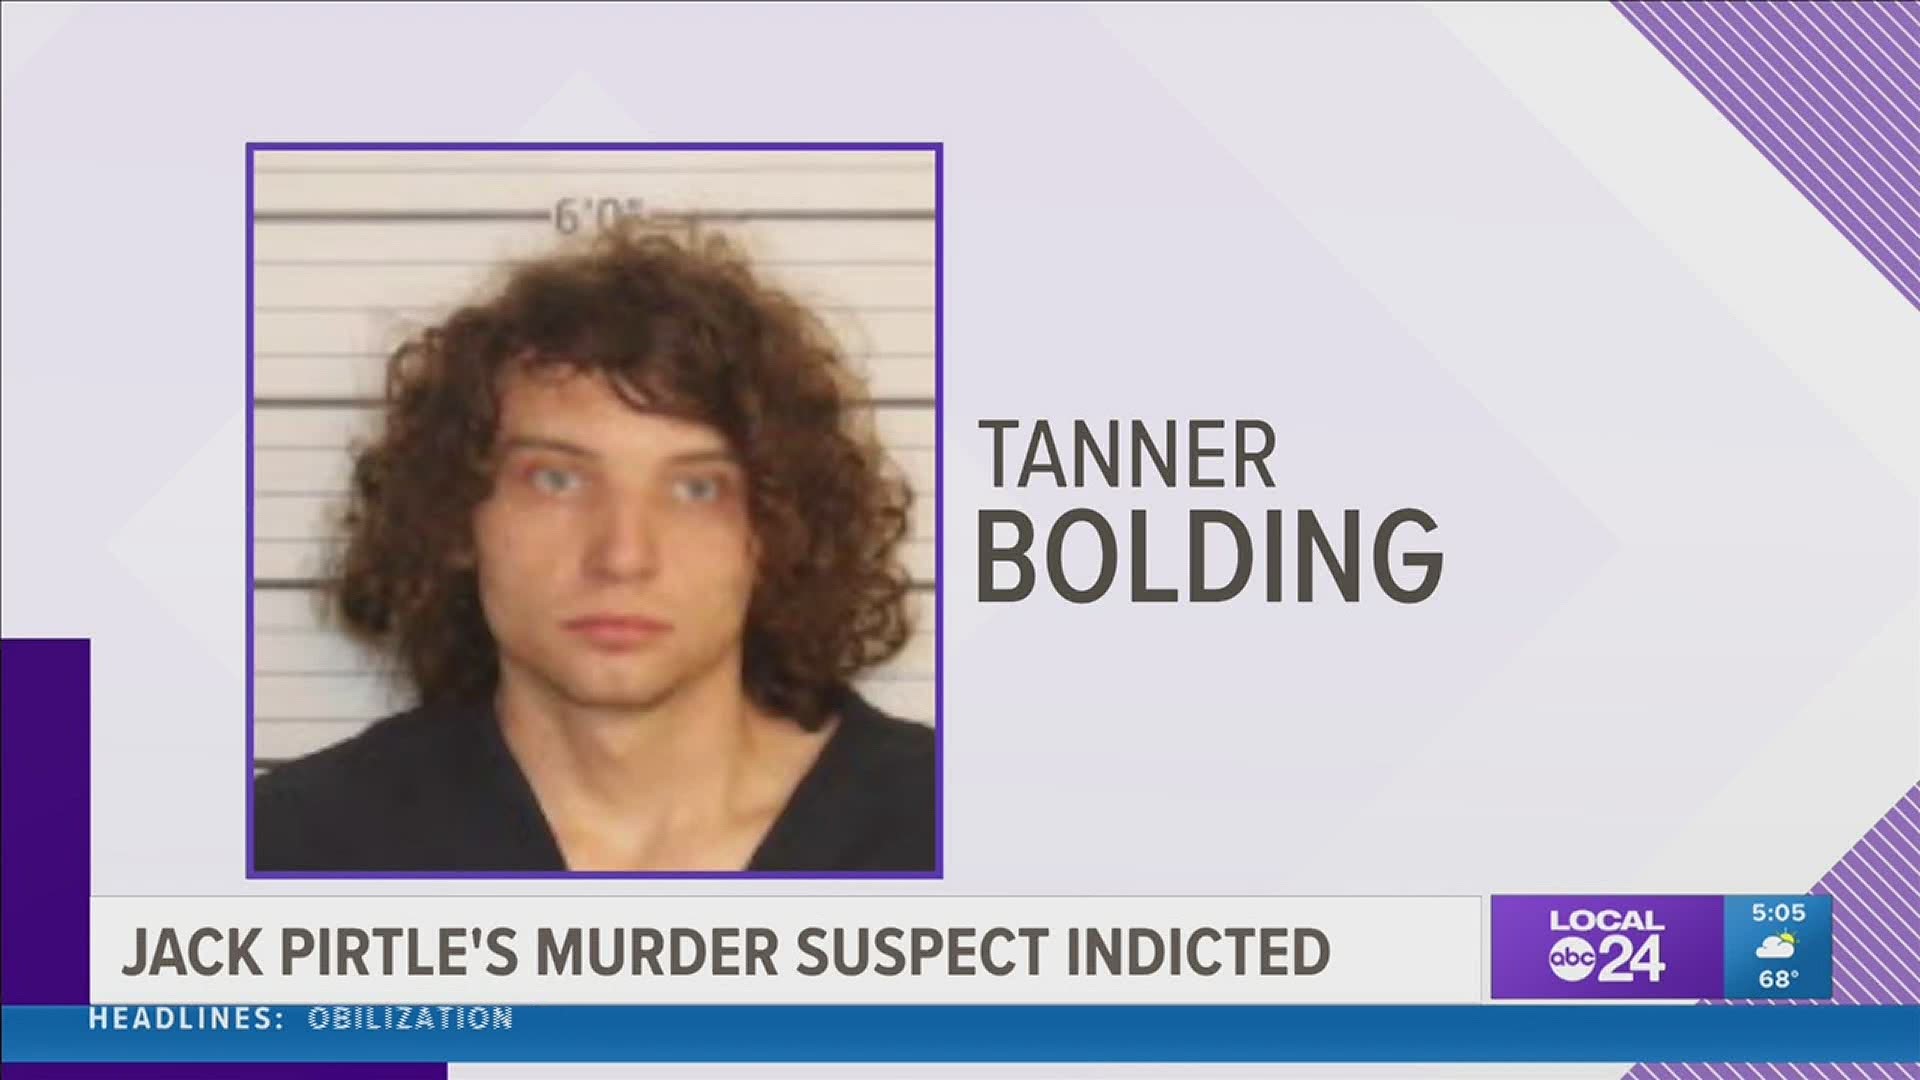 Tanner Bolding, 23, is charged with killing Randal Cardwell, a delivery truck driver from Paragould, Arkansas.